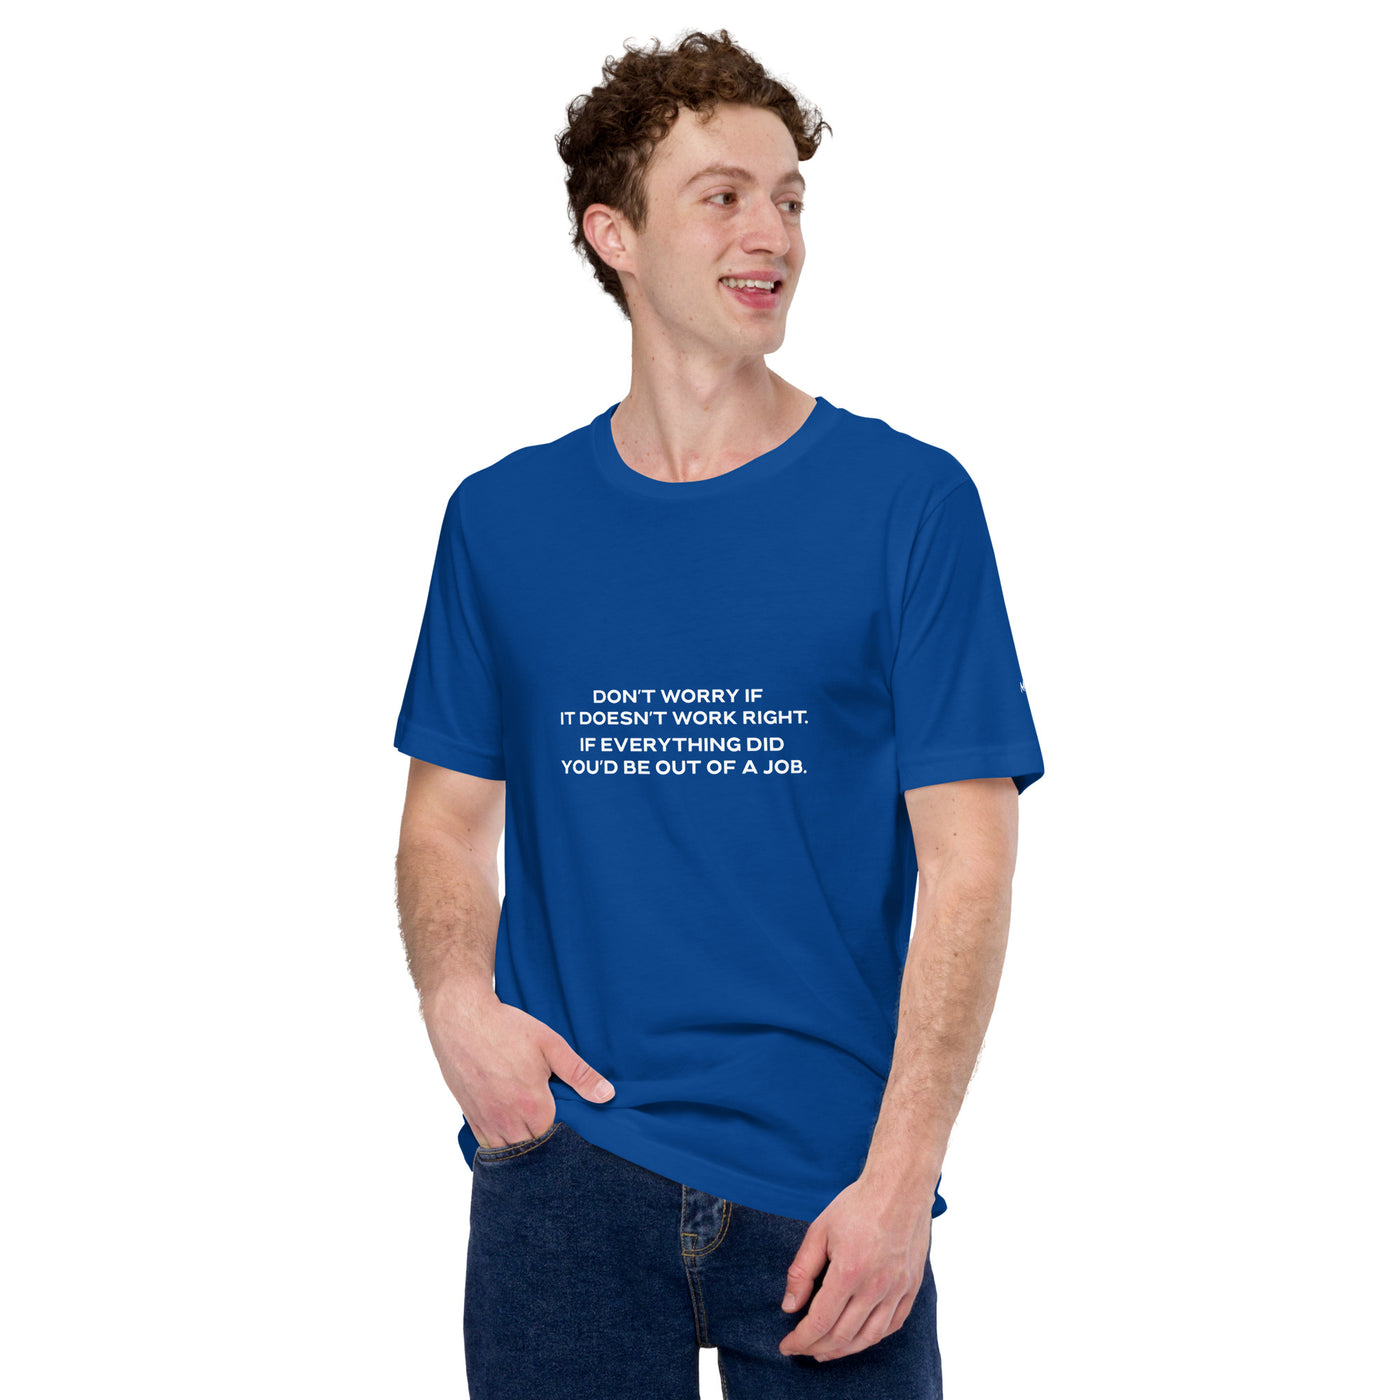 Don't worry if it doesn't work right: if everything did, you would be out of your job V1 - Unisex t-shirt